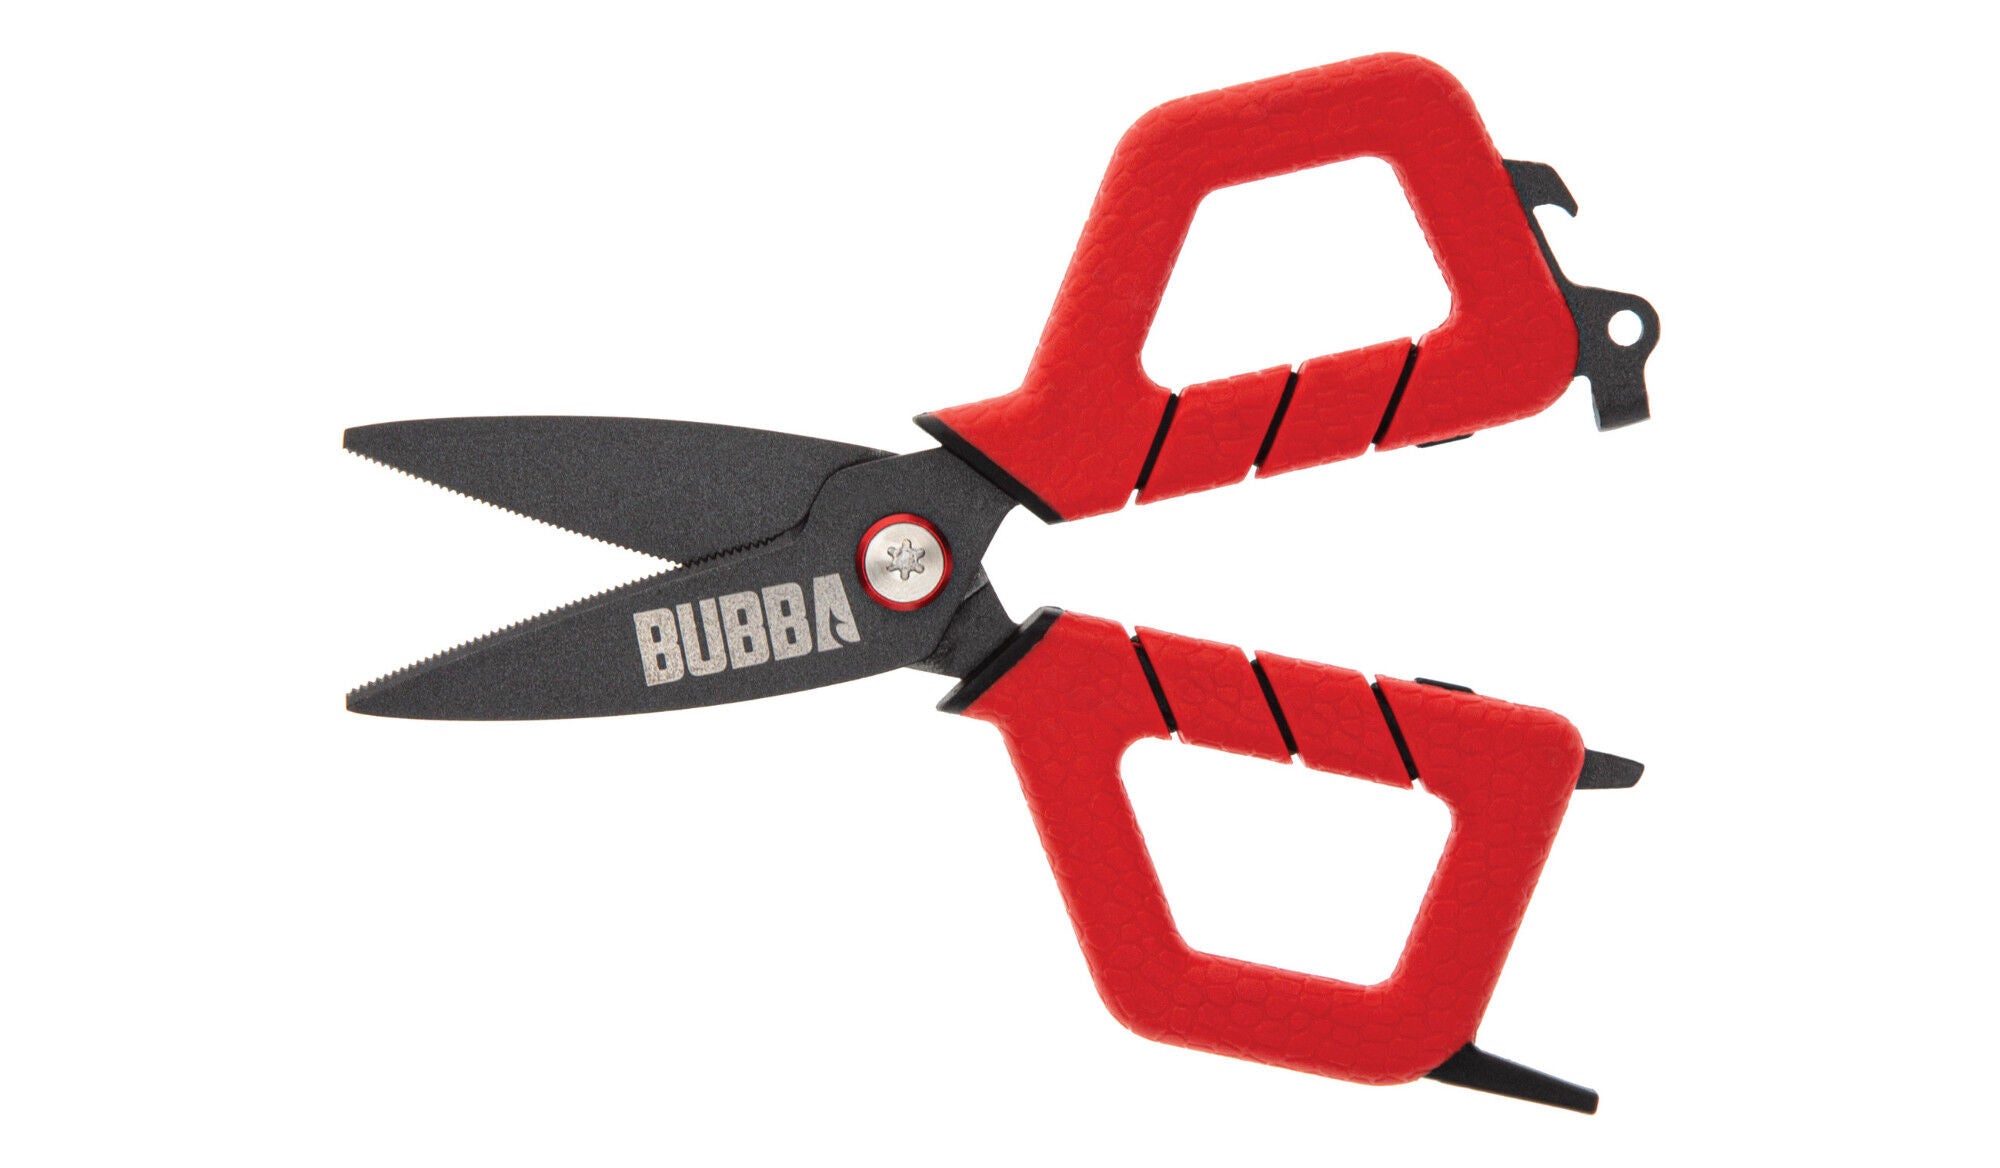 Bubba Stainless Steel Pliers 6.5 - LOTWSHQ